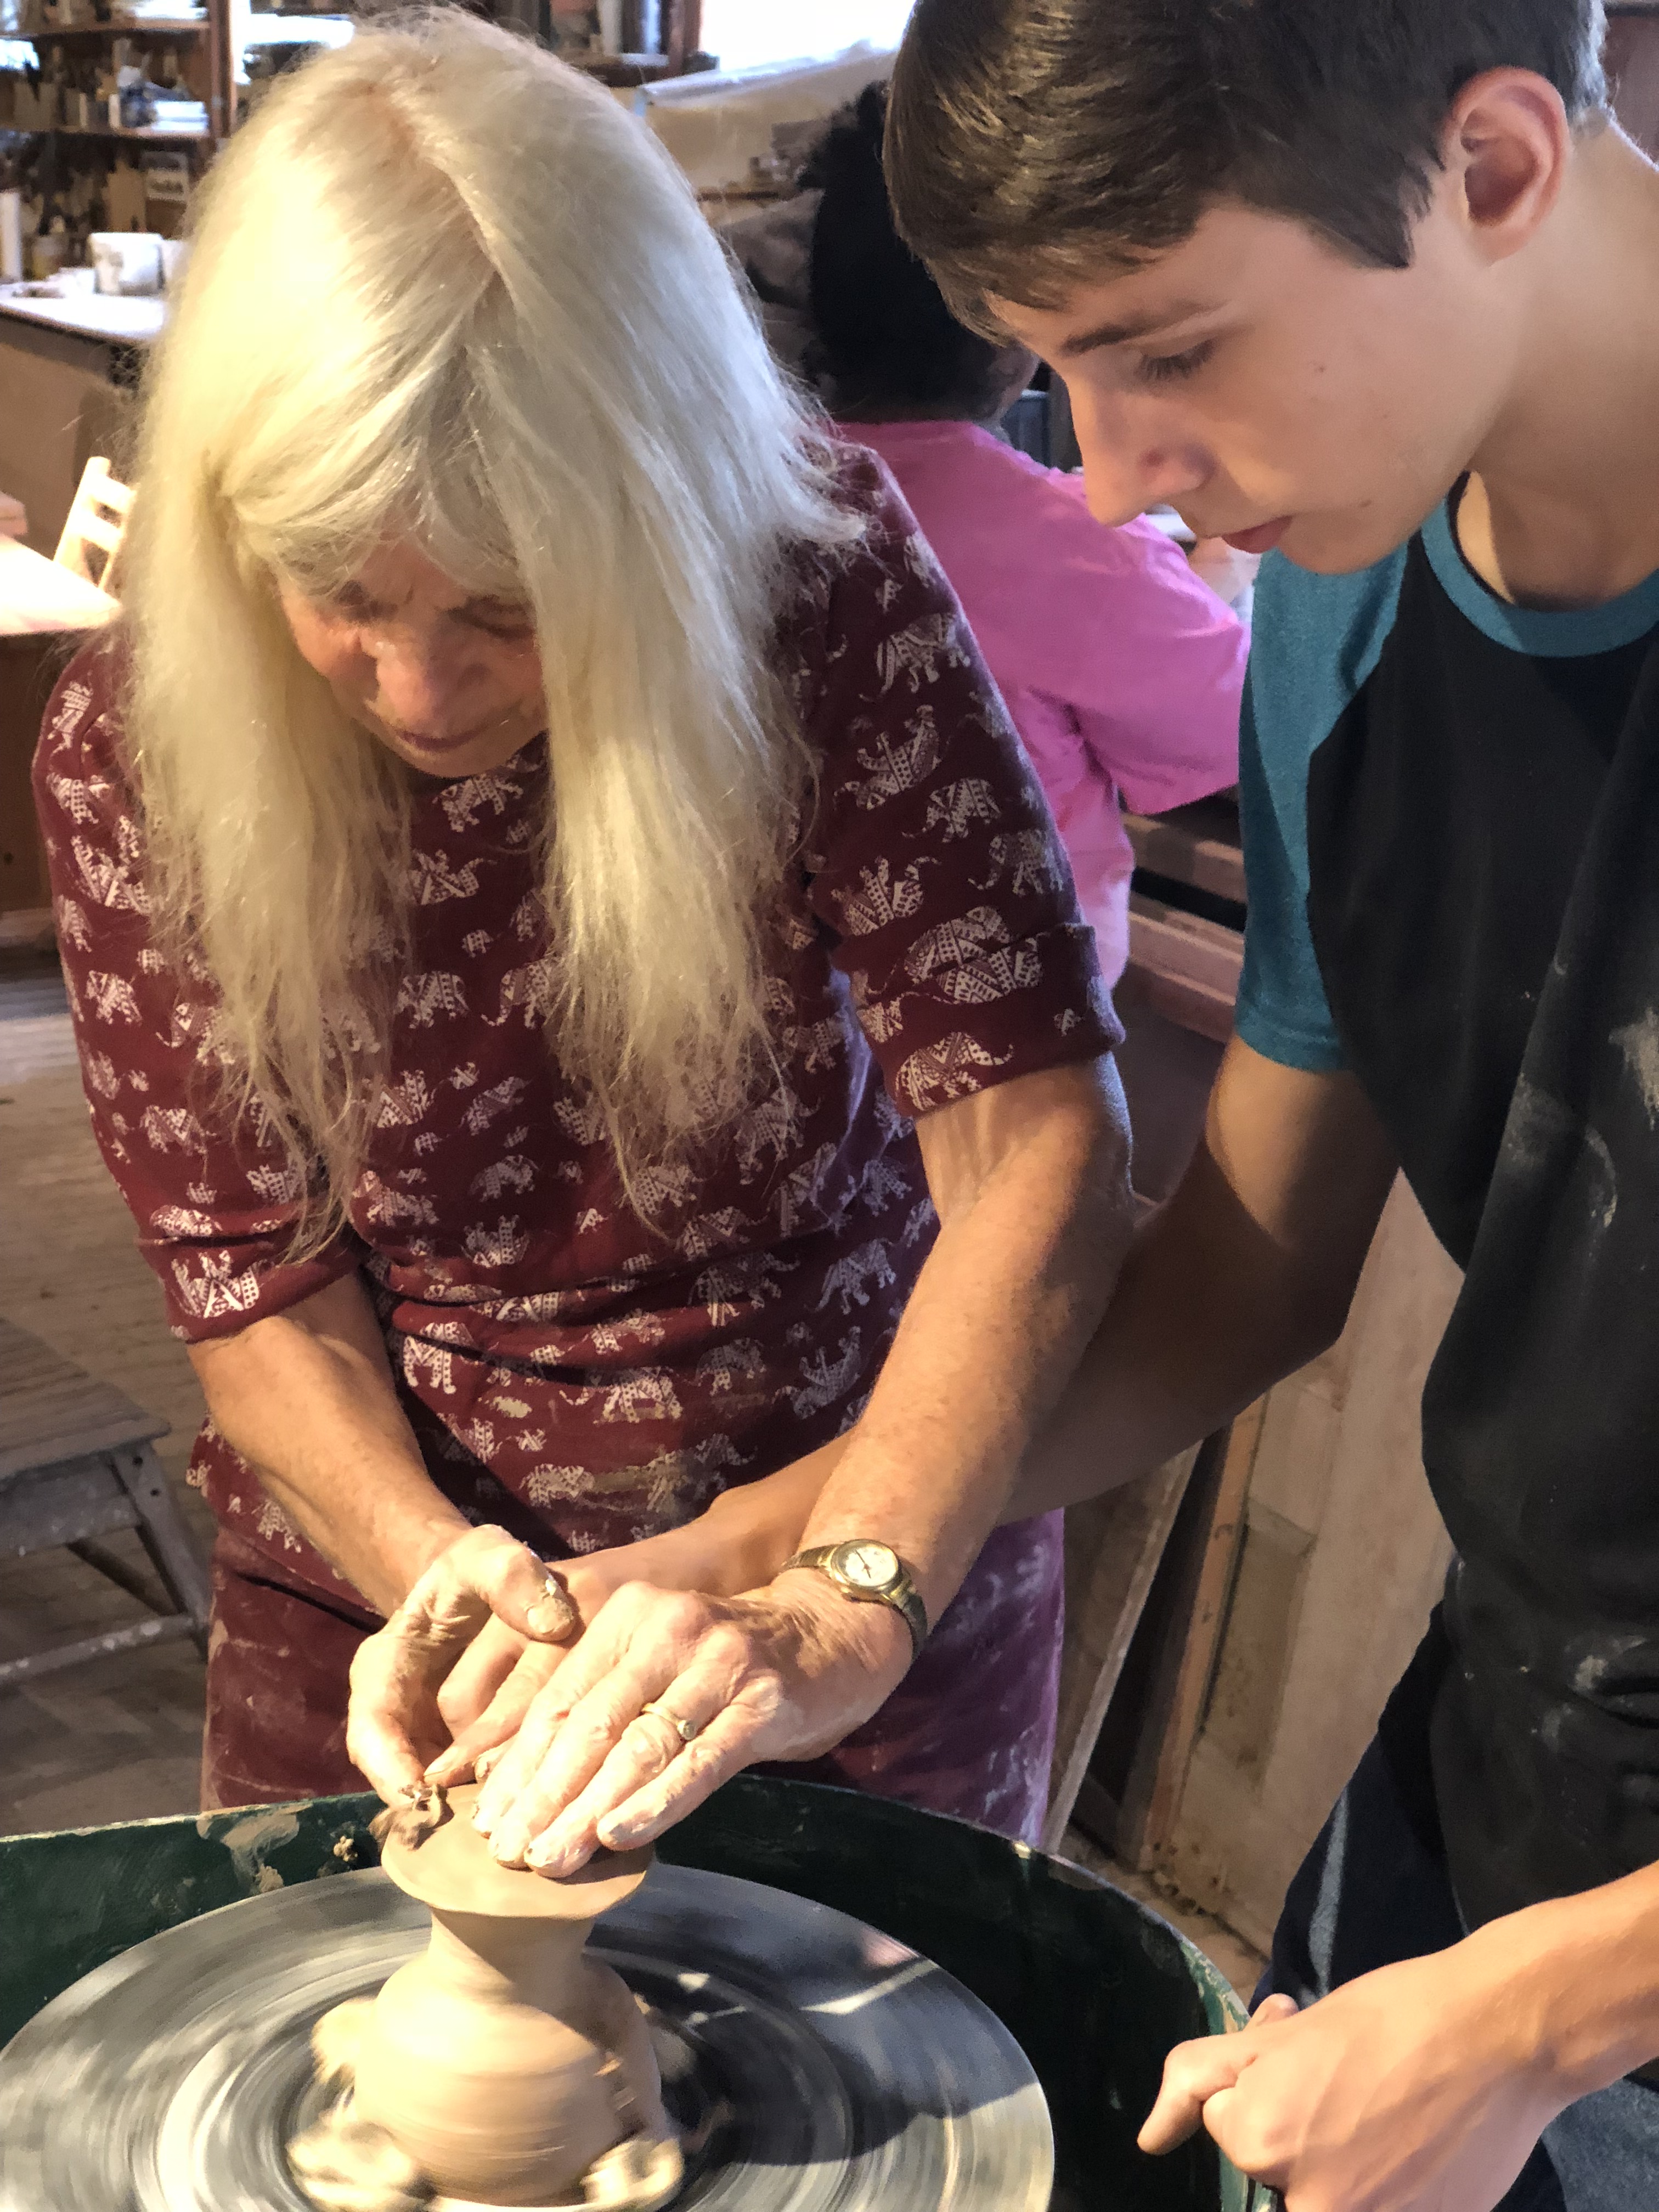 Teacher assisting student with sculpting pottery